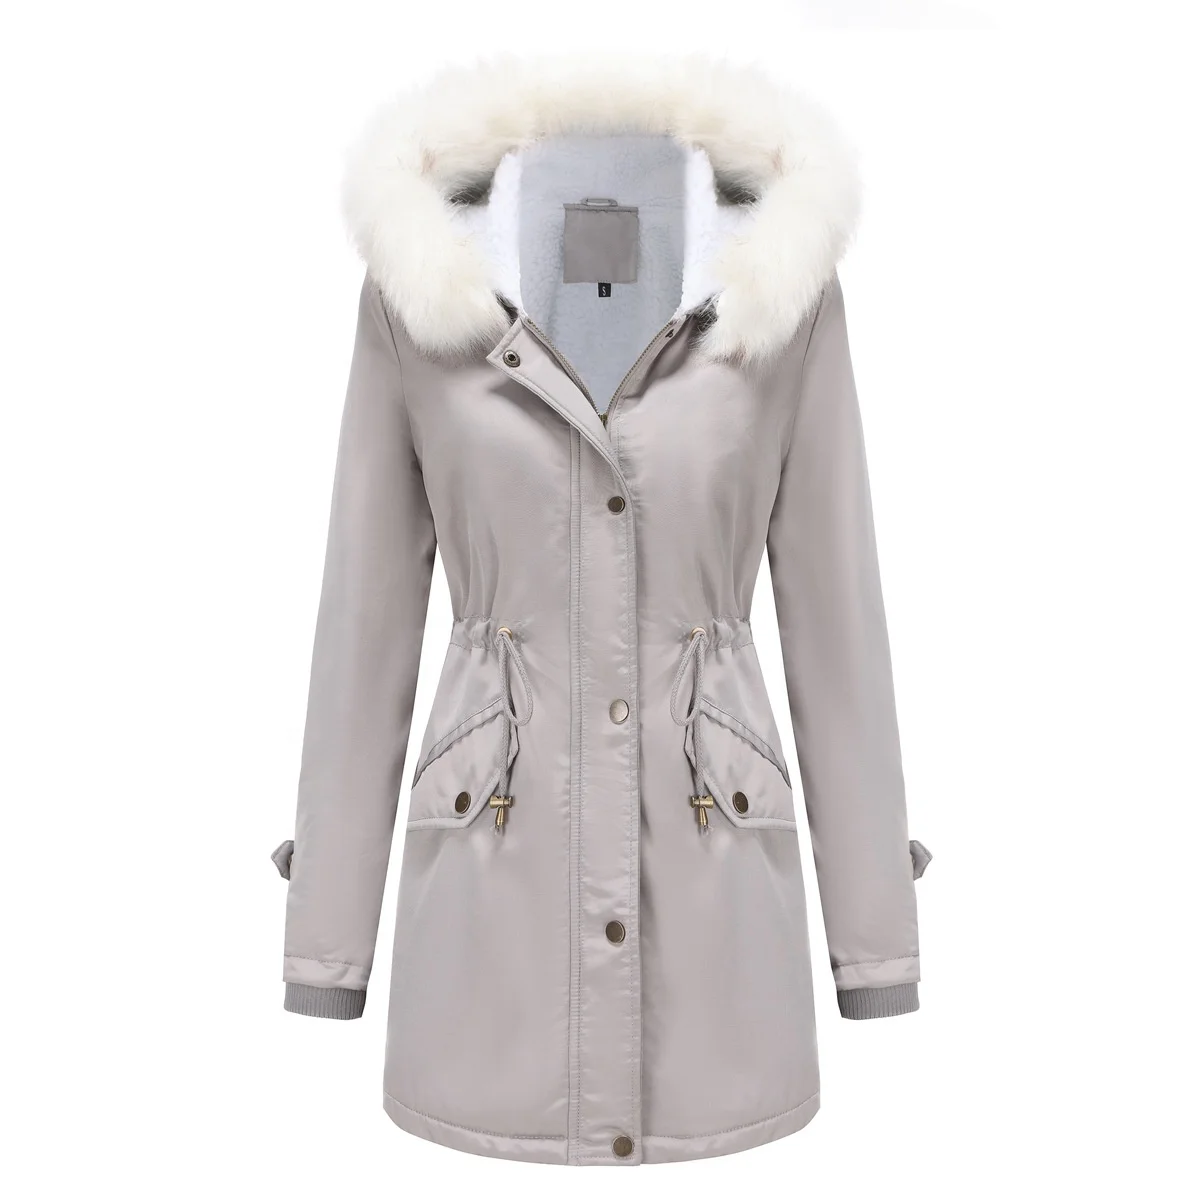 Womens Winter Hooded Parka Cotton Lined Down Coats Warm Fashion Lightweight With Zipper Portable Puffer Jackets